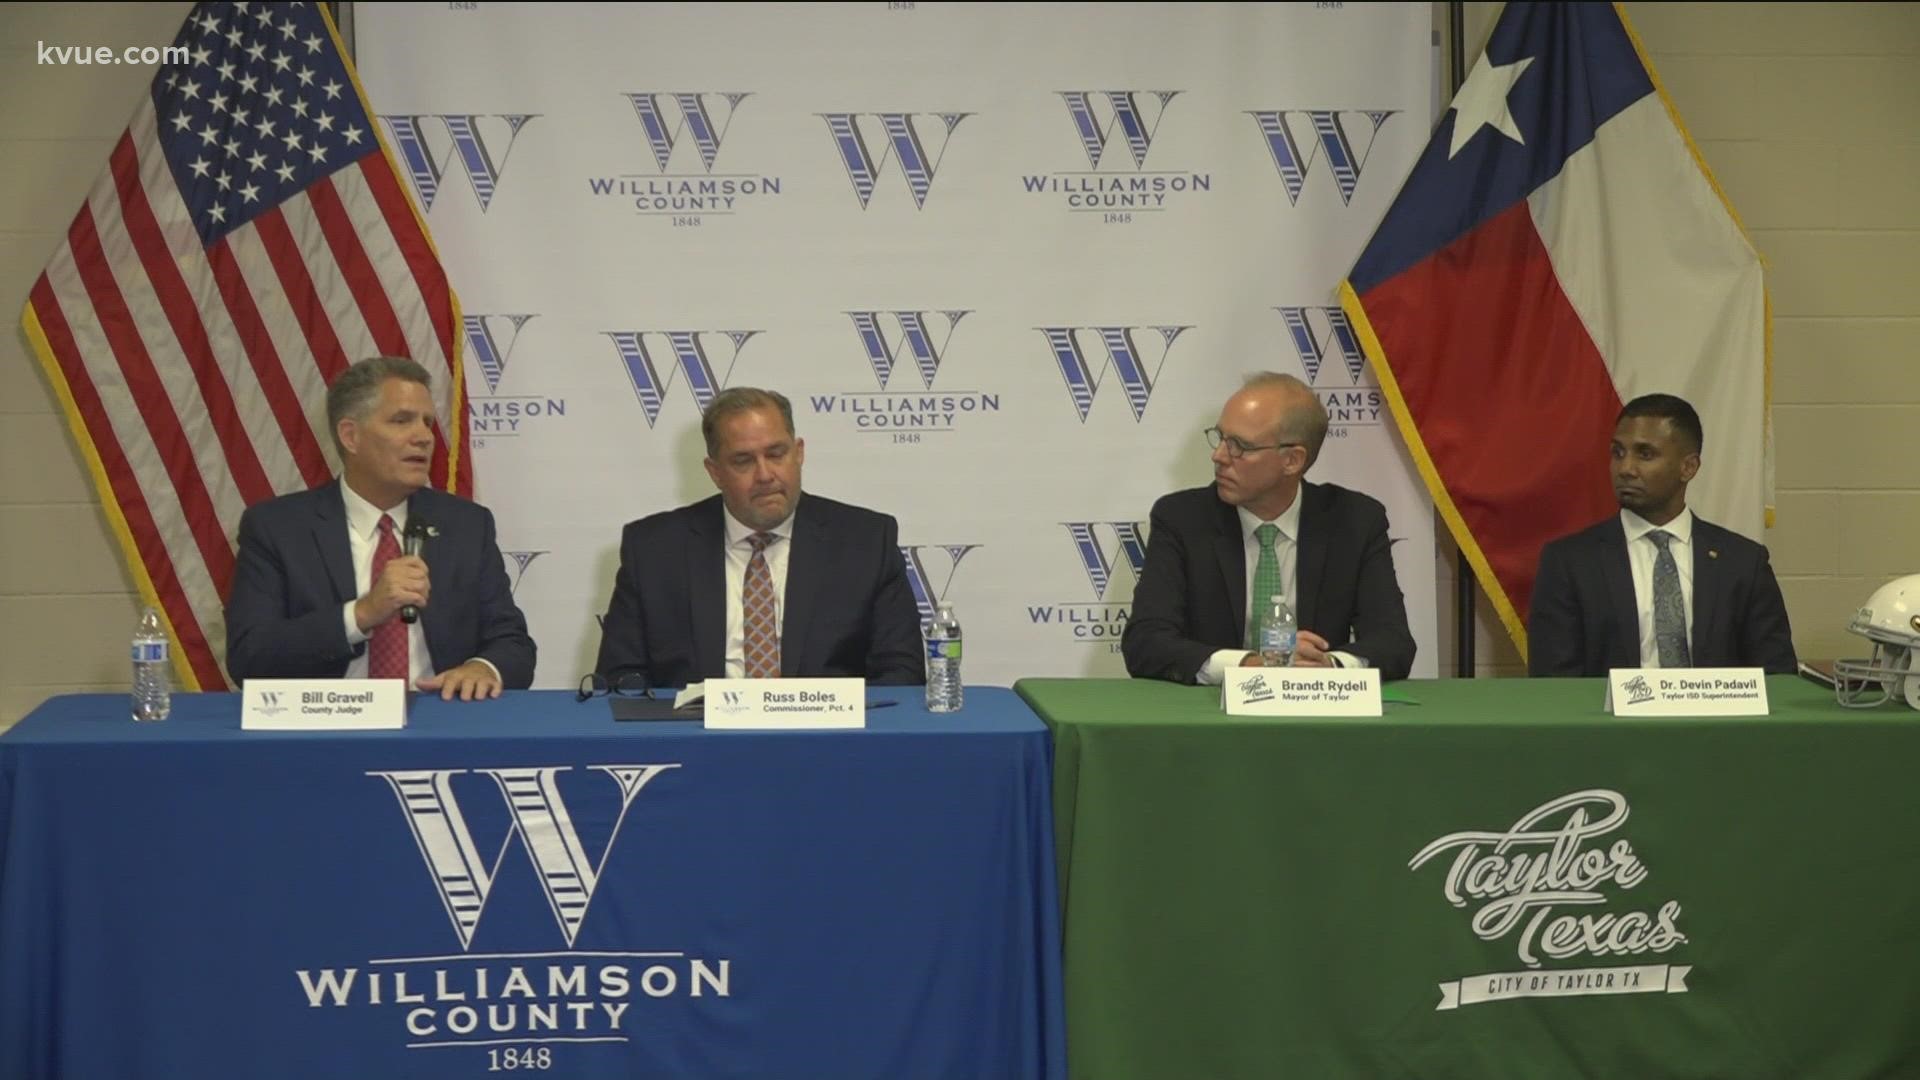 Local Williamson County and City of Taylor lawmakers are welcoming Samsung as it considers Taylor for a $17 billion plant.